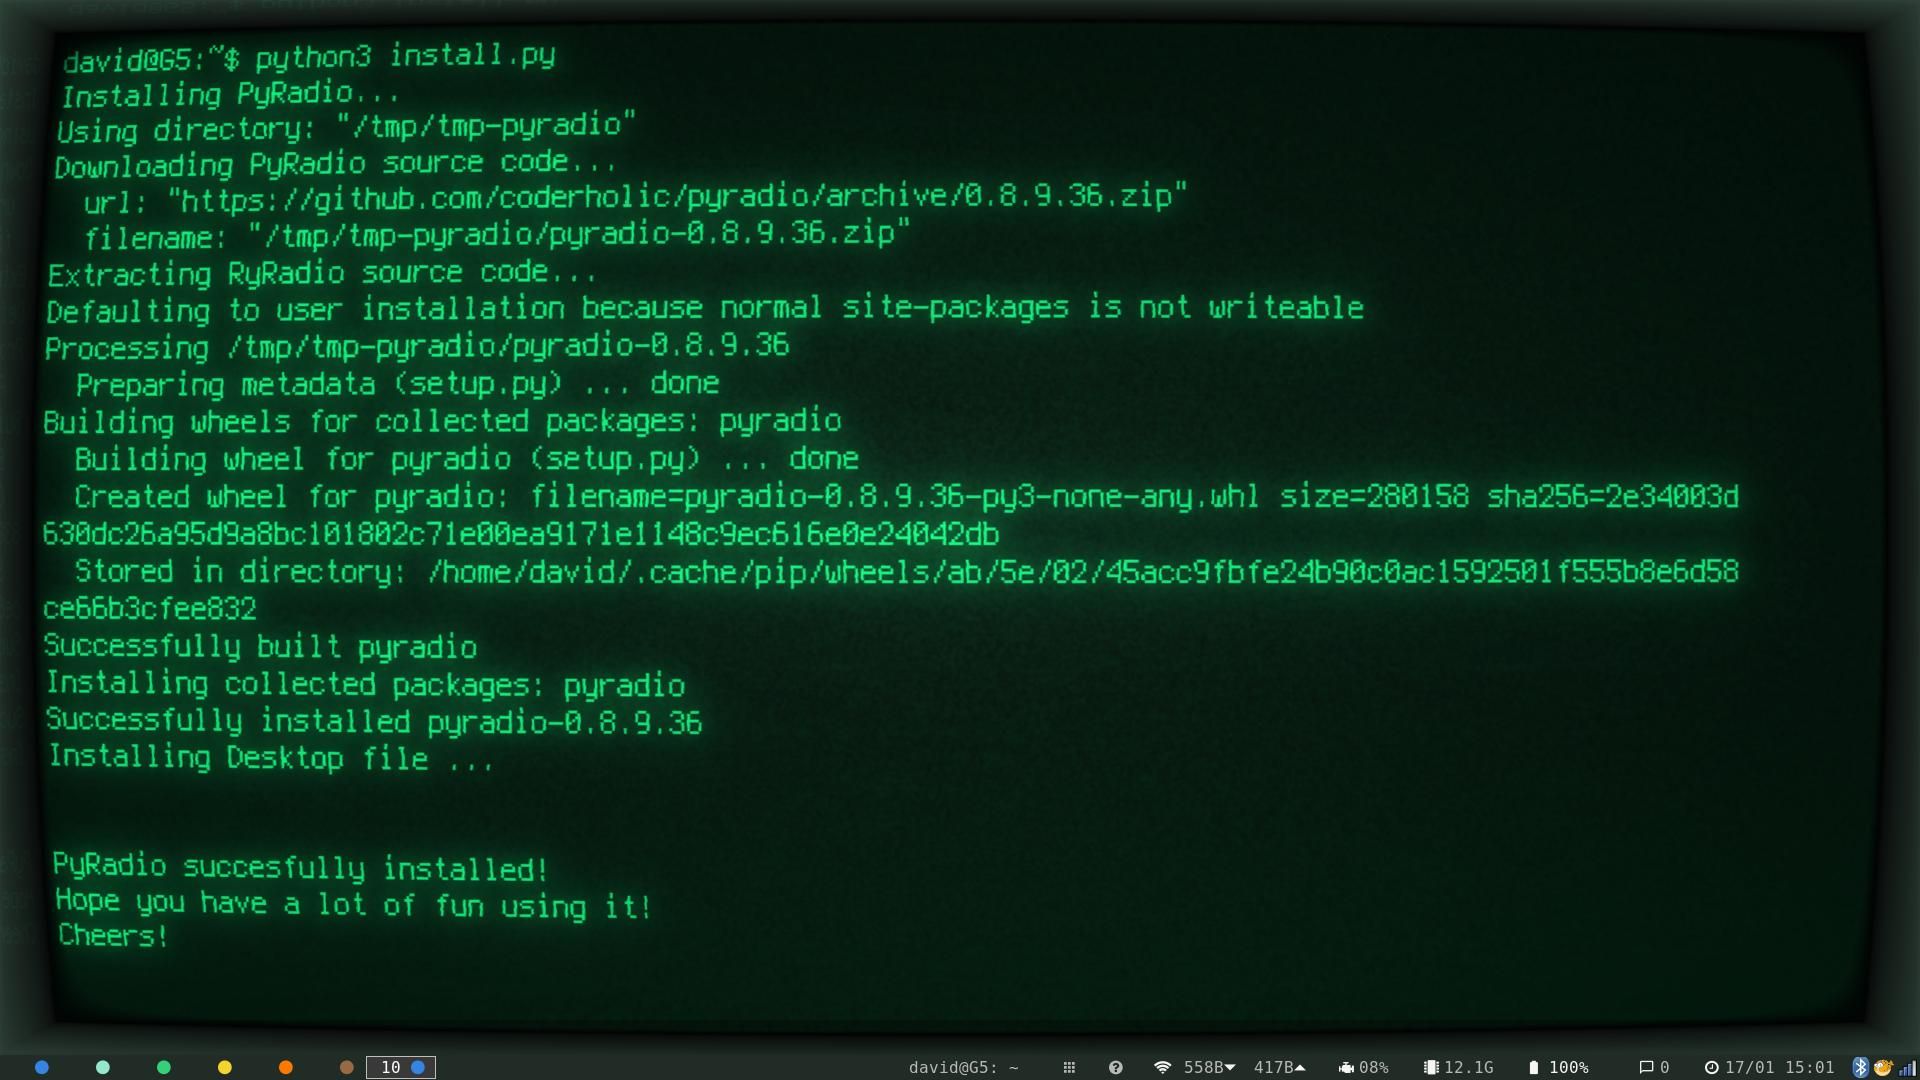 success message from the terminal after installing PyRadio